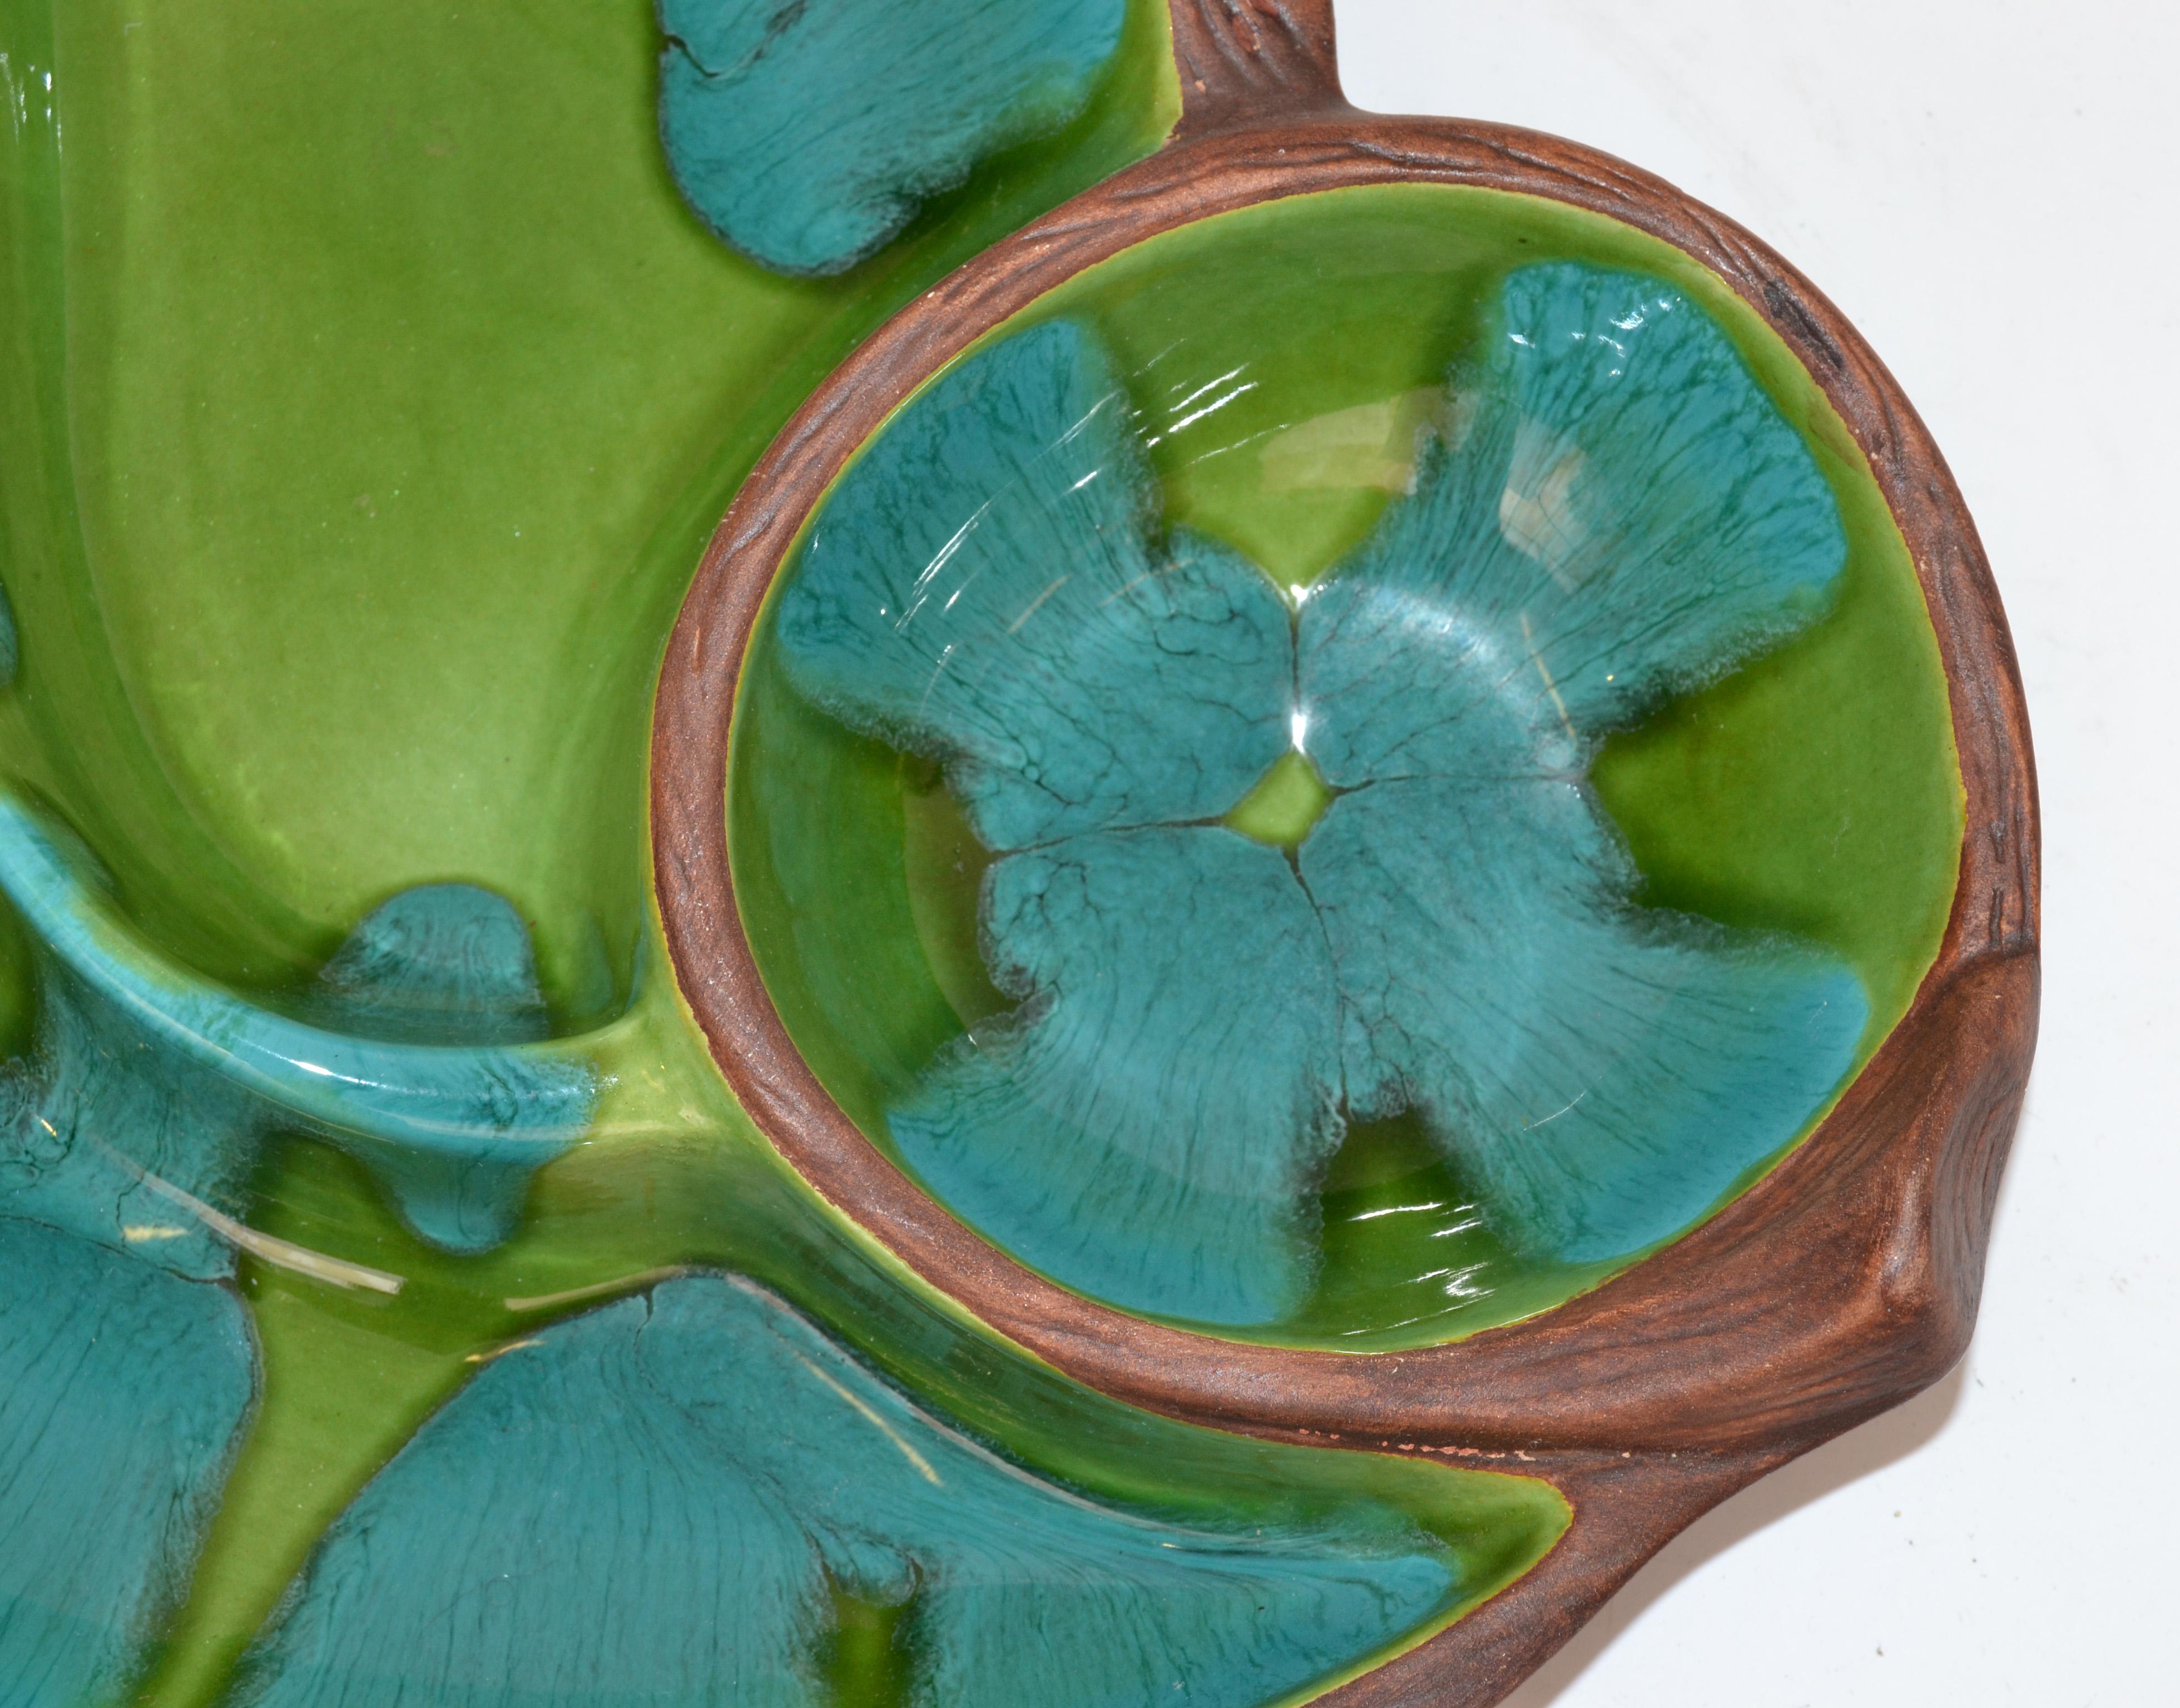 Brown Green Turquoise Glazed Ceramic Pottery Dish Mid-Century Modern, USA For Sale 1